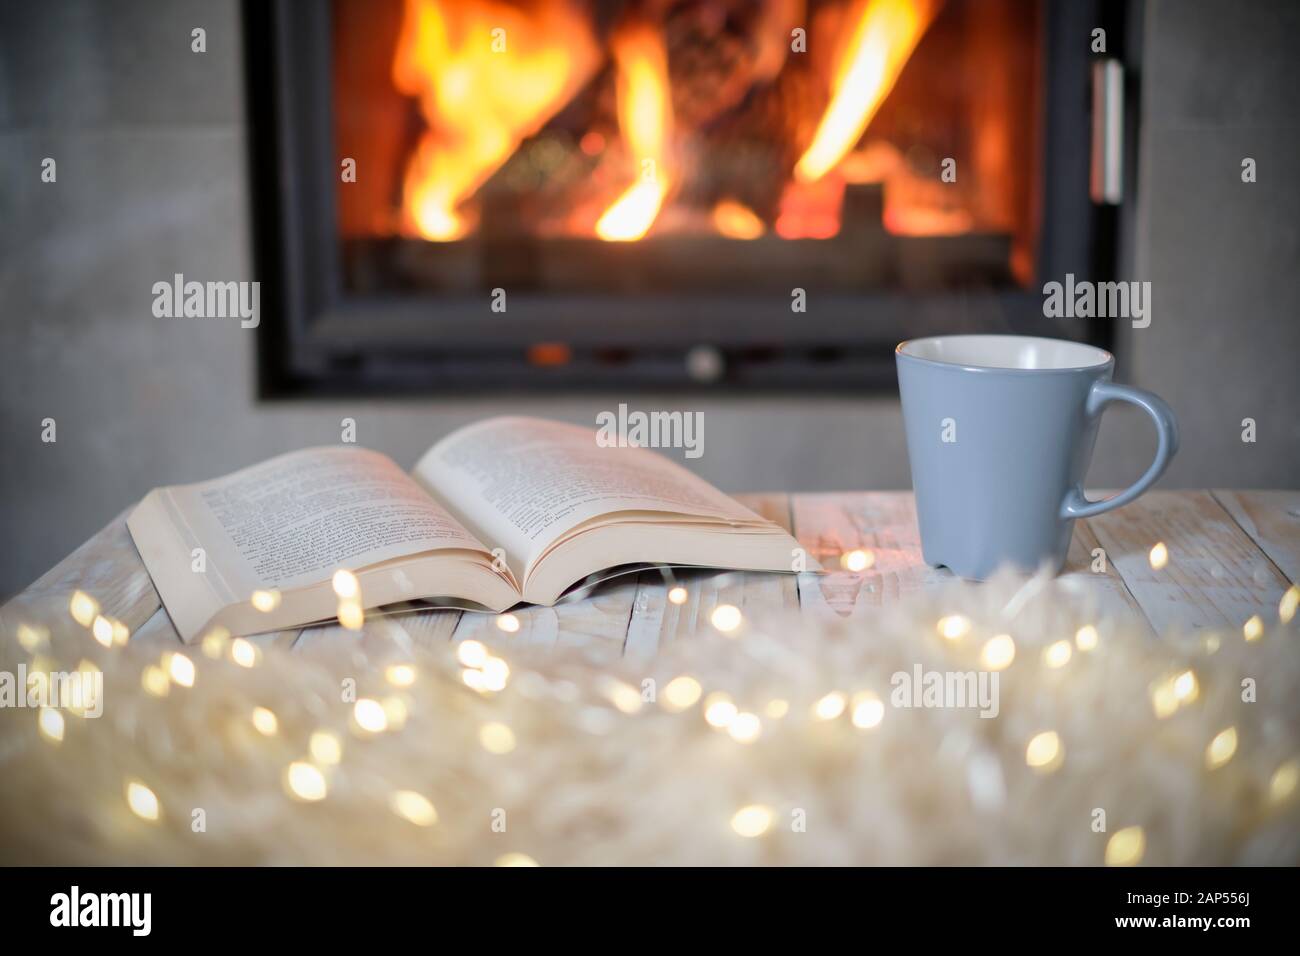 Open book and cup of tea near burning fireplace. Hygge concept Stock Photo